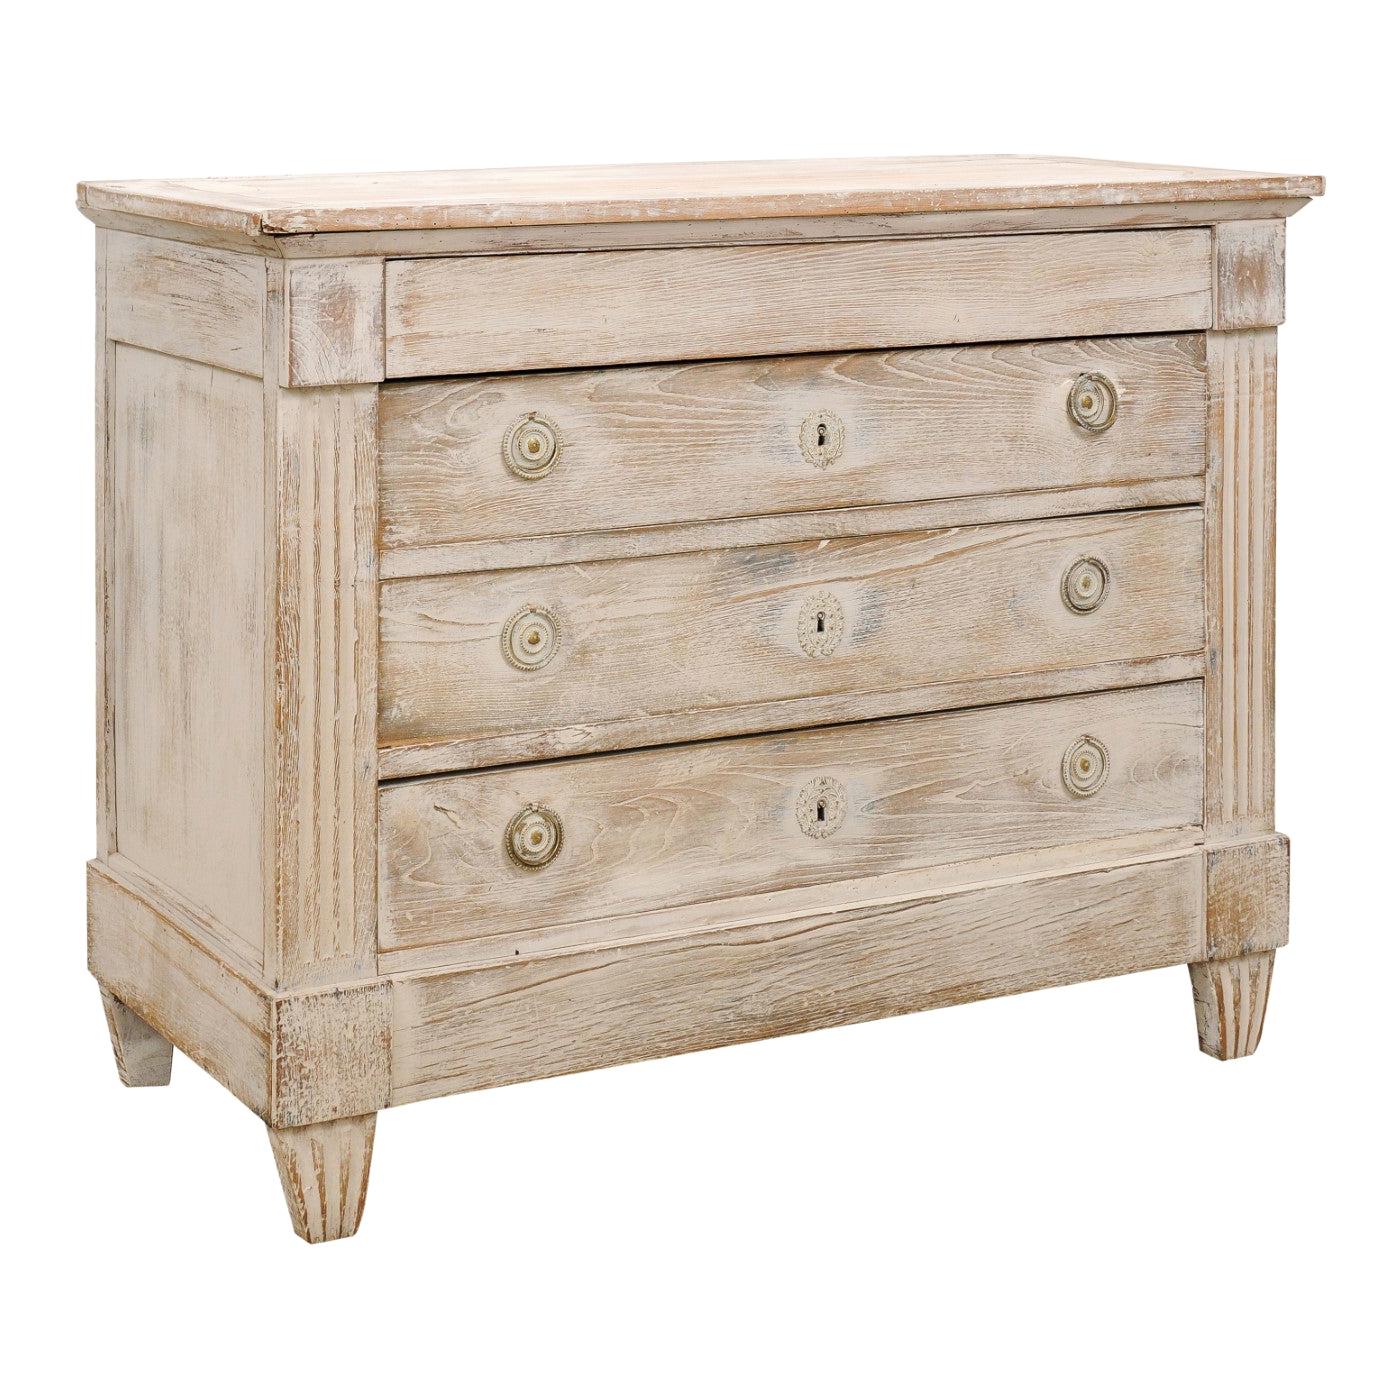 Northern French Louis XVI Style Blanched Commode with Four Drawers, circa 1890